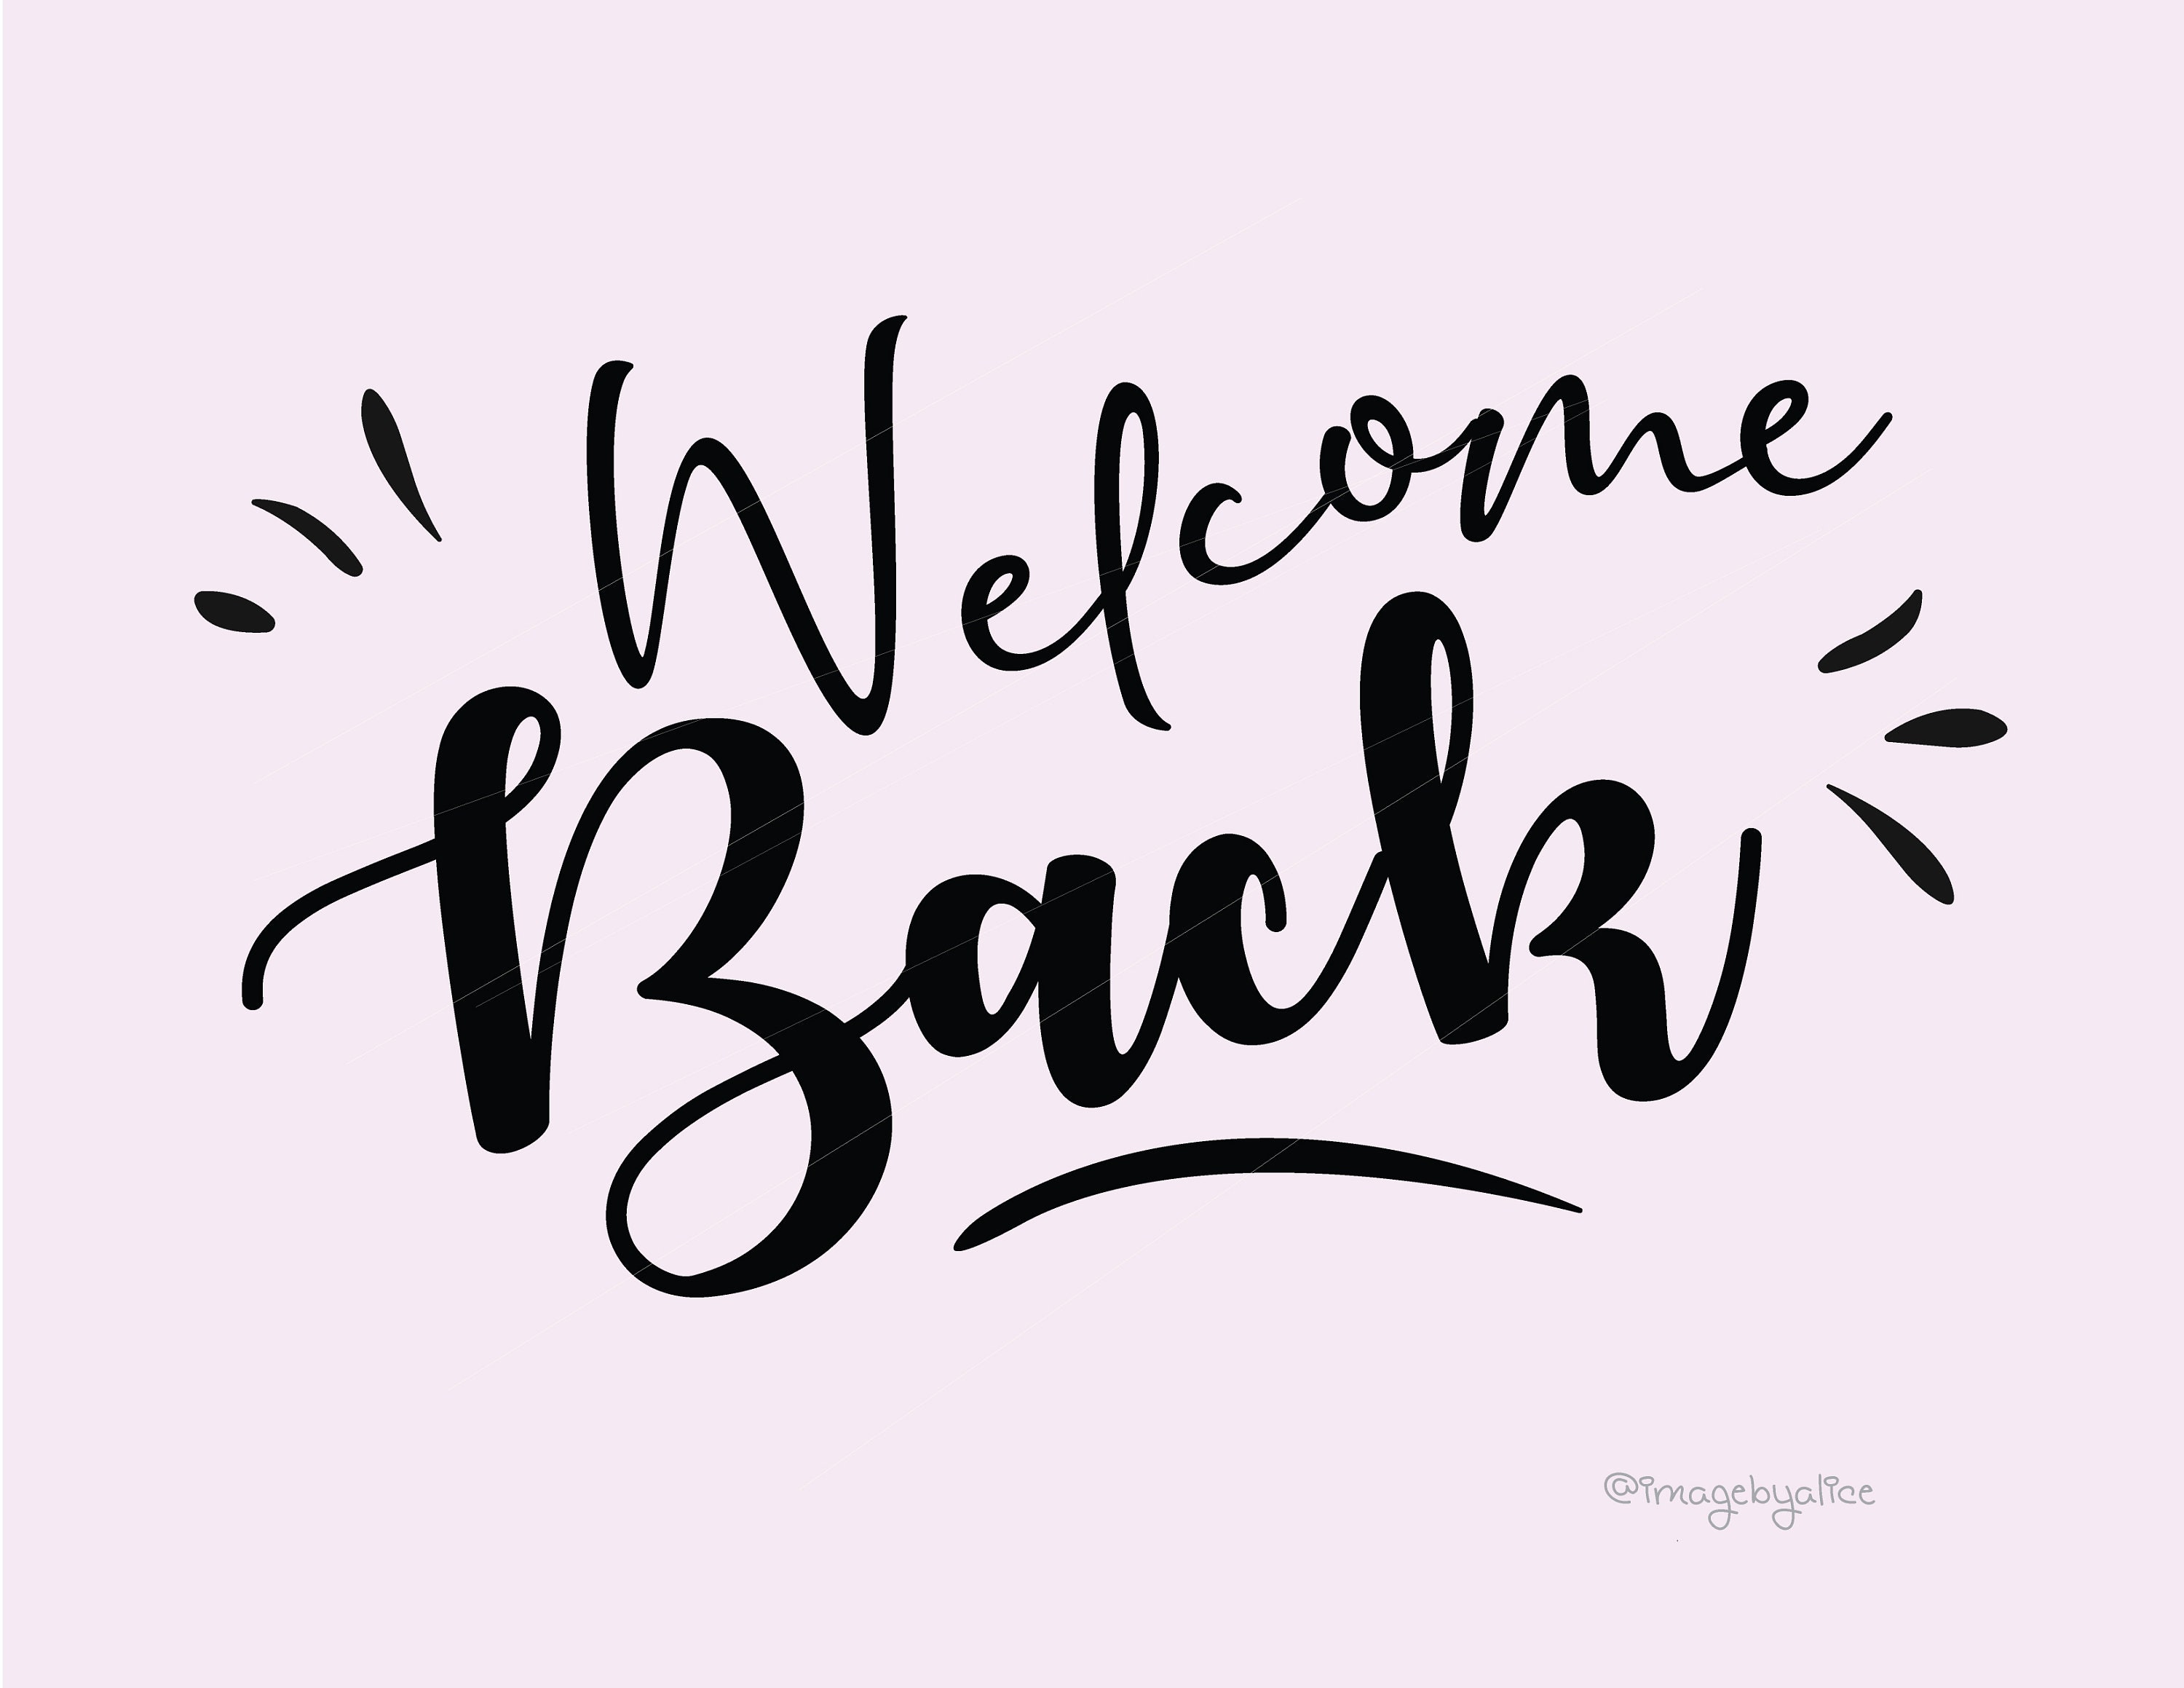 Welcome back Stickers - Free miscellaneous Stickers